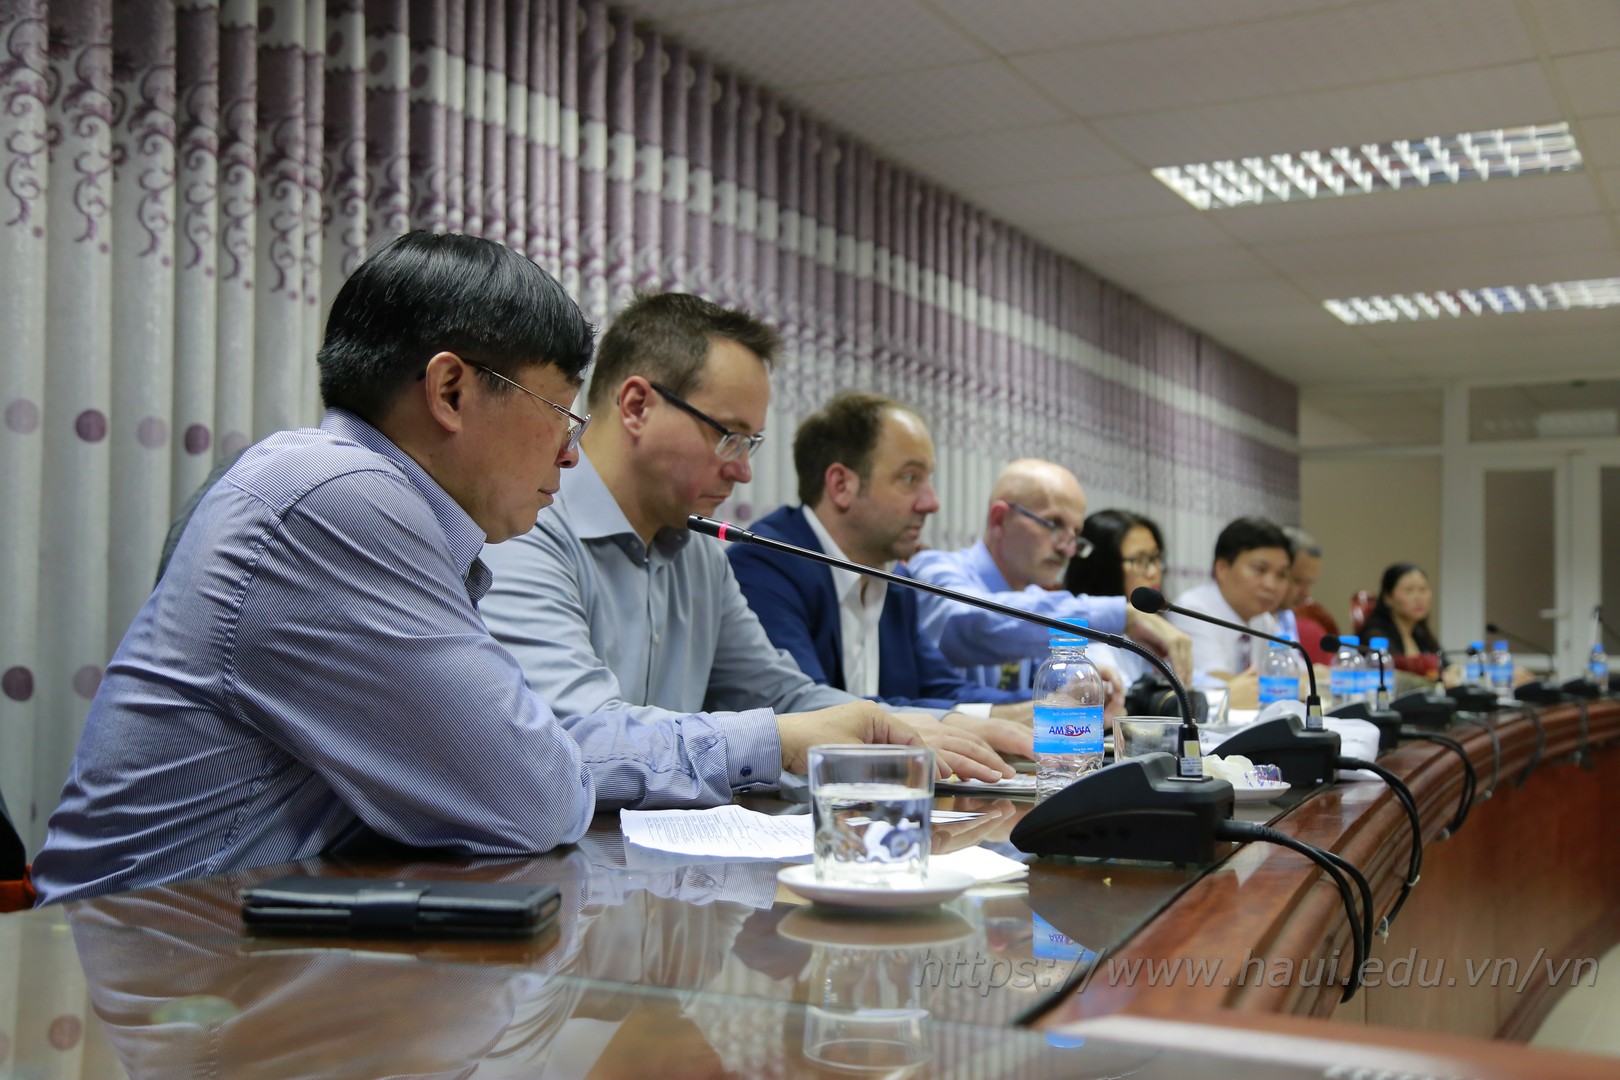 Hanoi University of Industry meets with Hoffman Group, Germany to discuss cooperation opportunities.